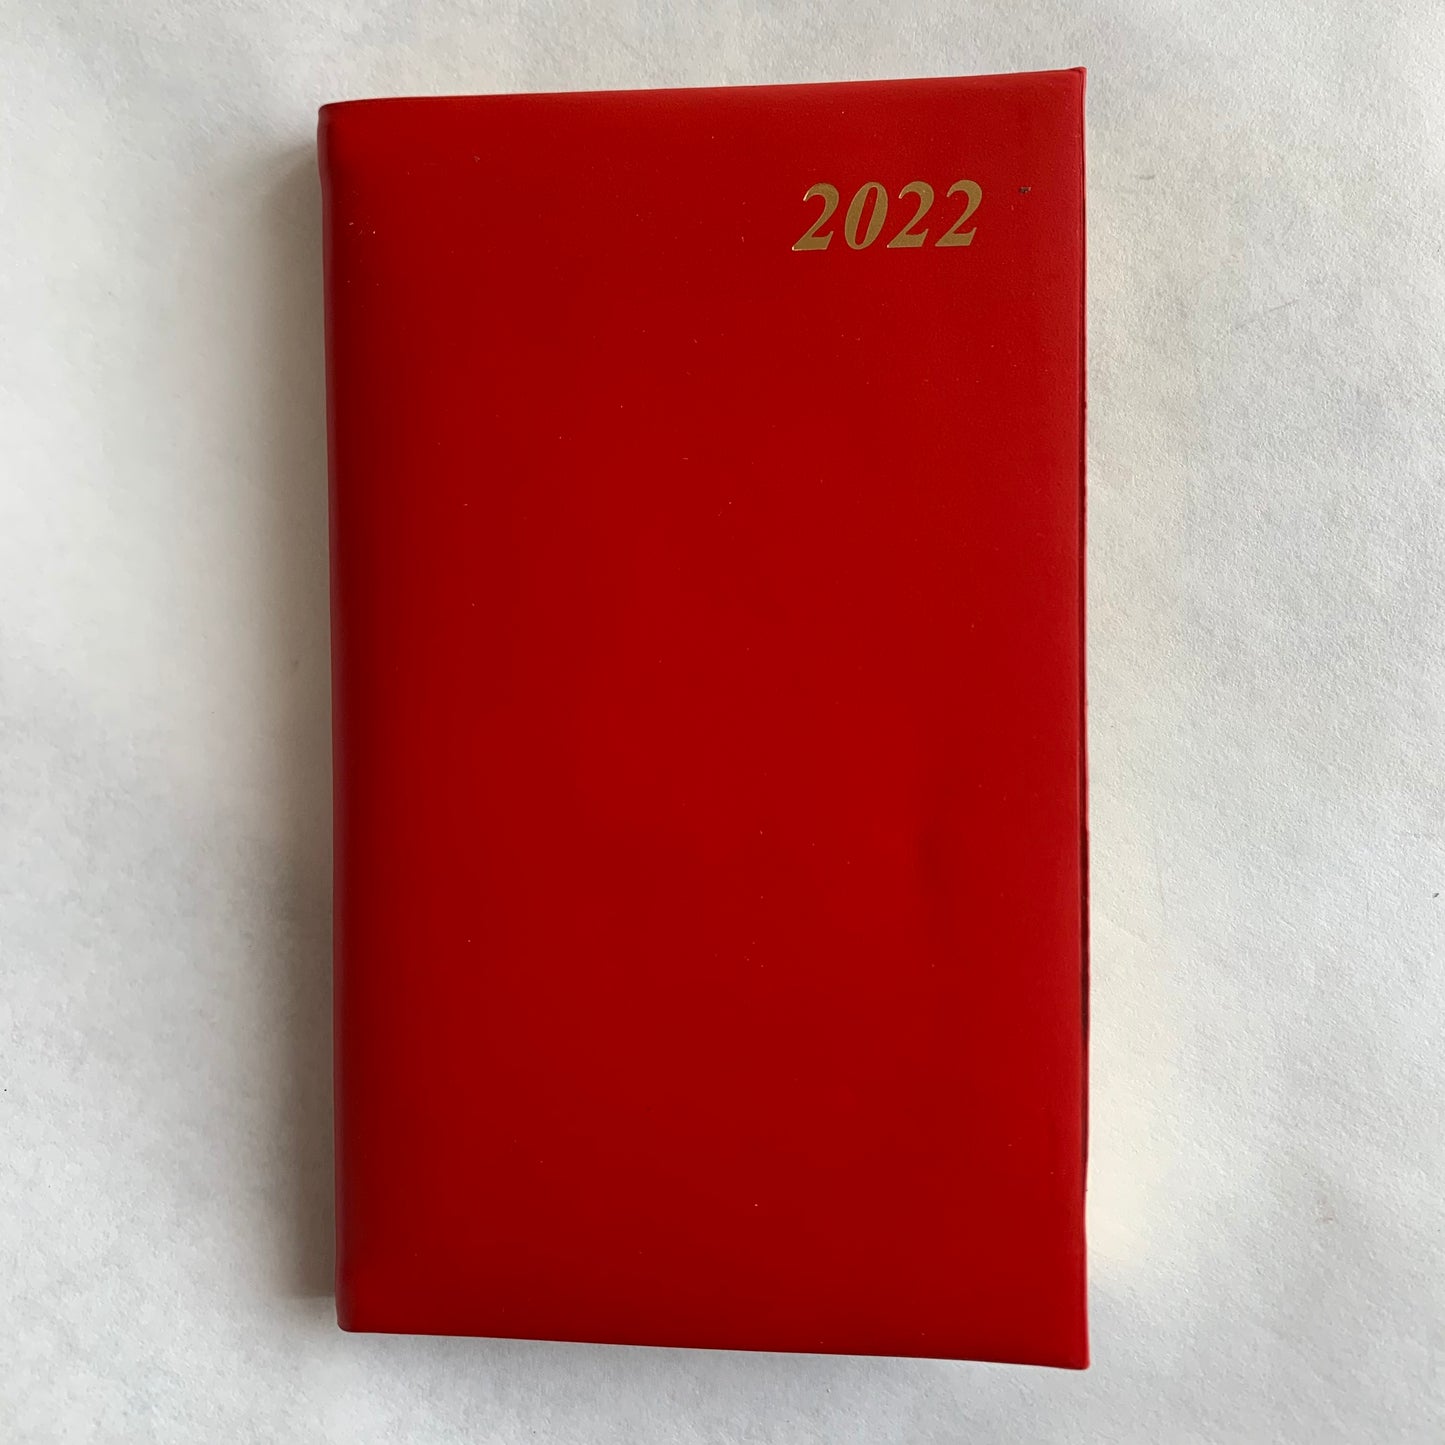 YEAR 2022 CALF Leather Pocket Agenda Book | 4 by 2.5" | D742C | Scarlet Red